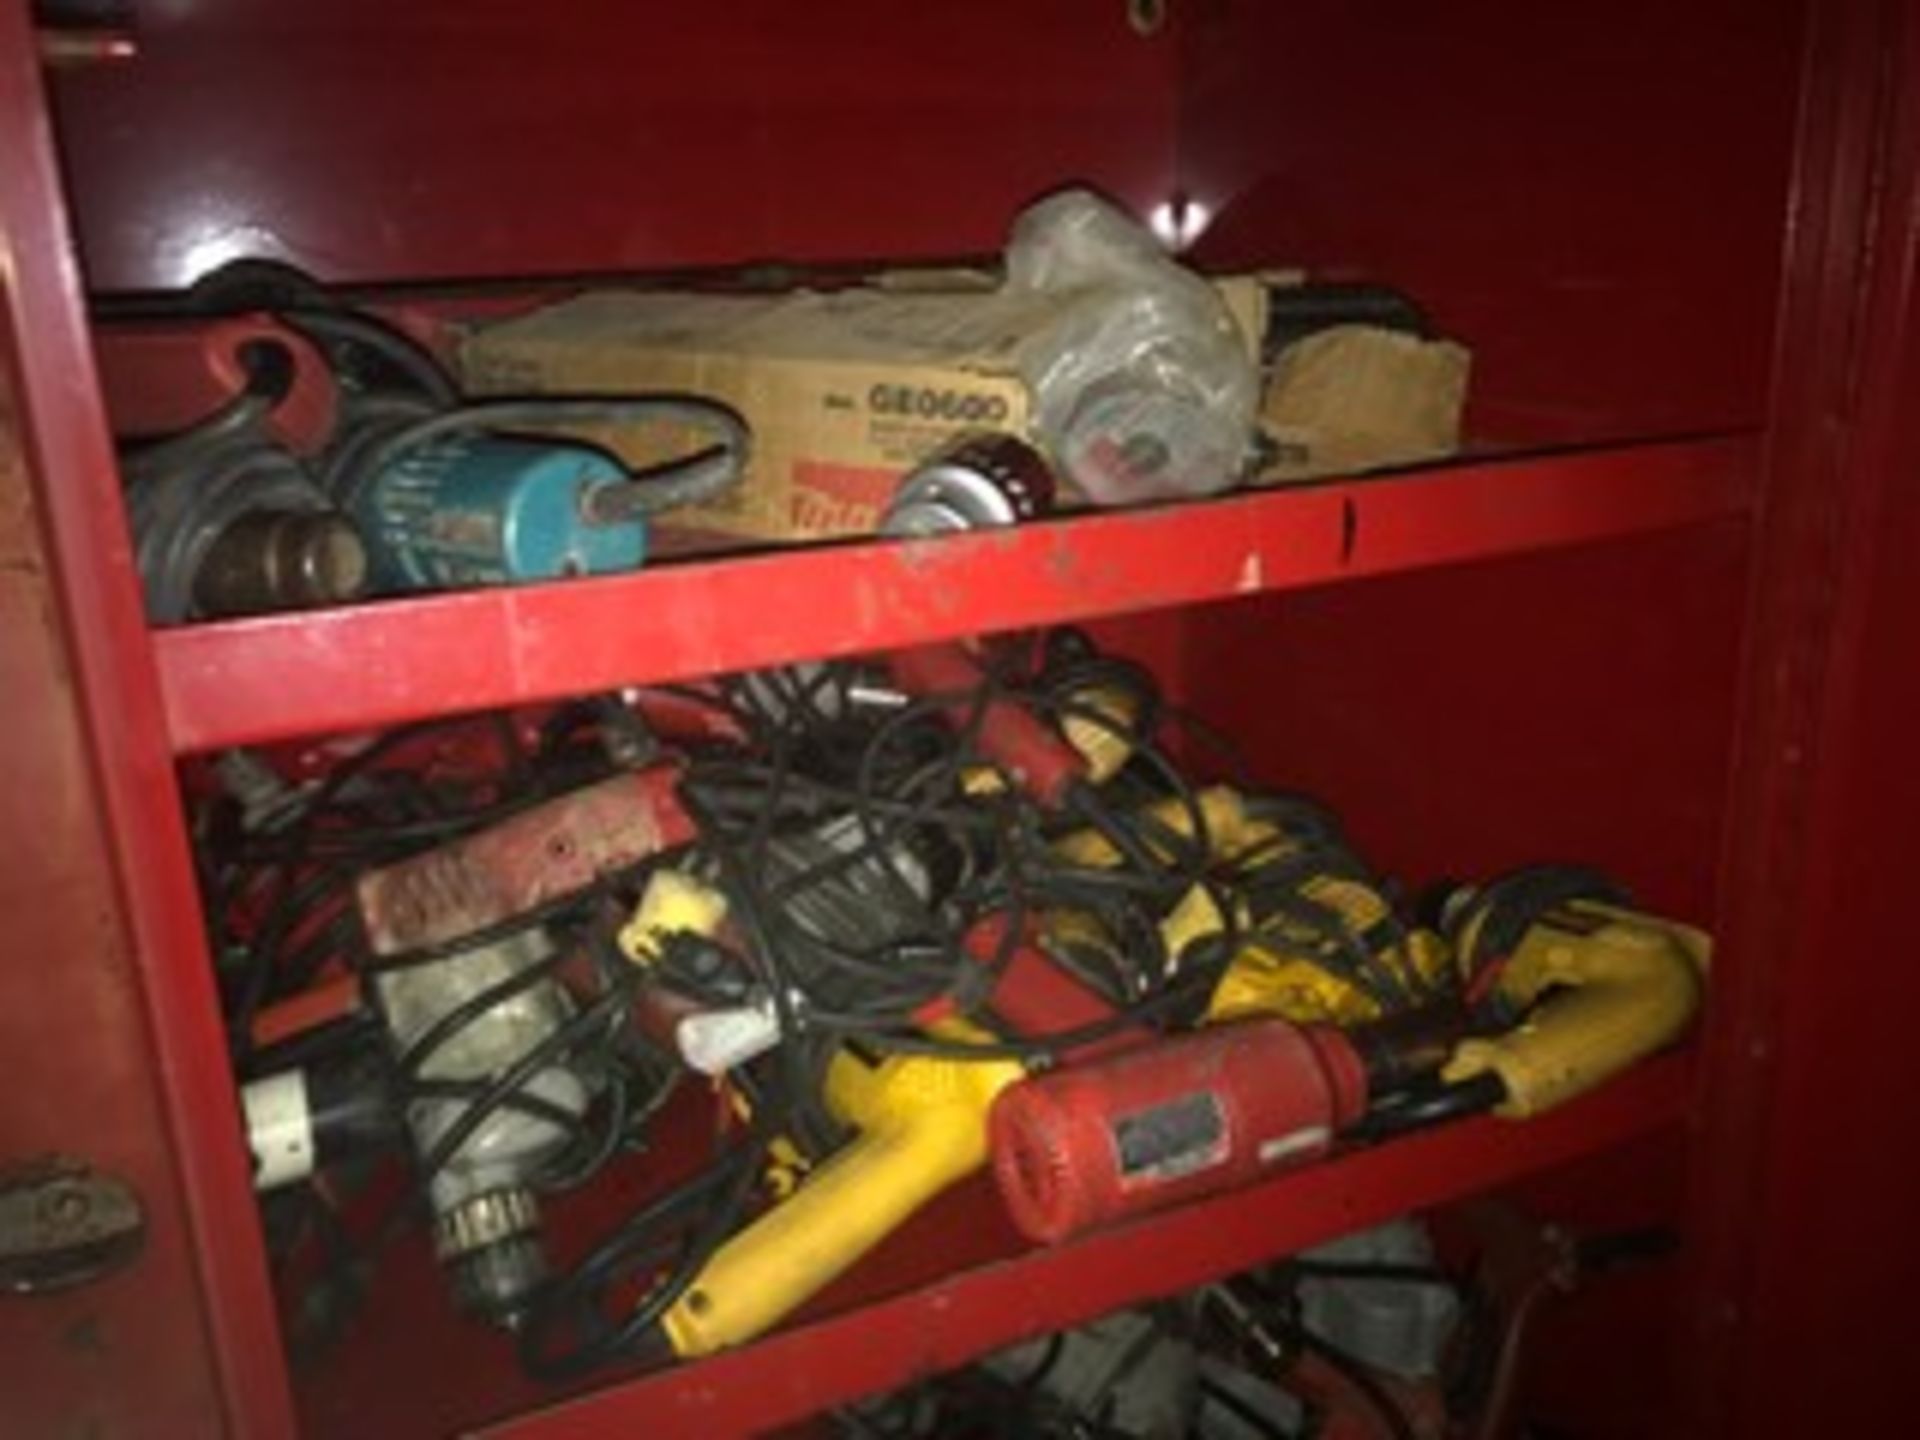 2-DOOR GB JOB BOX WITH CONTENTS -RATCHETING KNOCKOUT SETS, HILTI & RAMSET POWDER FASTENING GUNS - Image 4 of 6